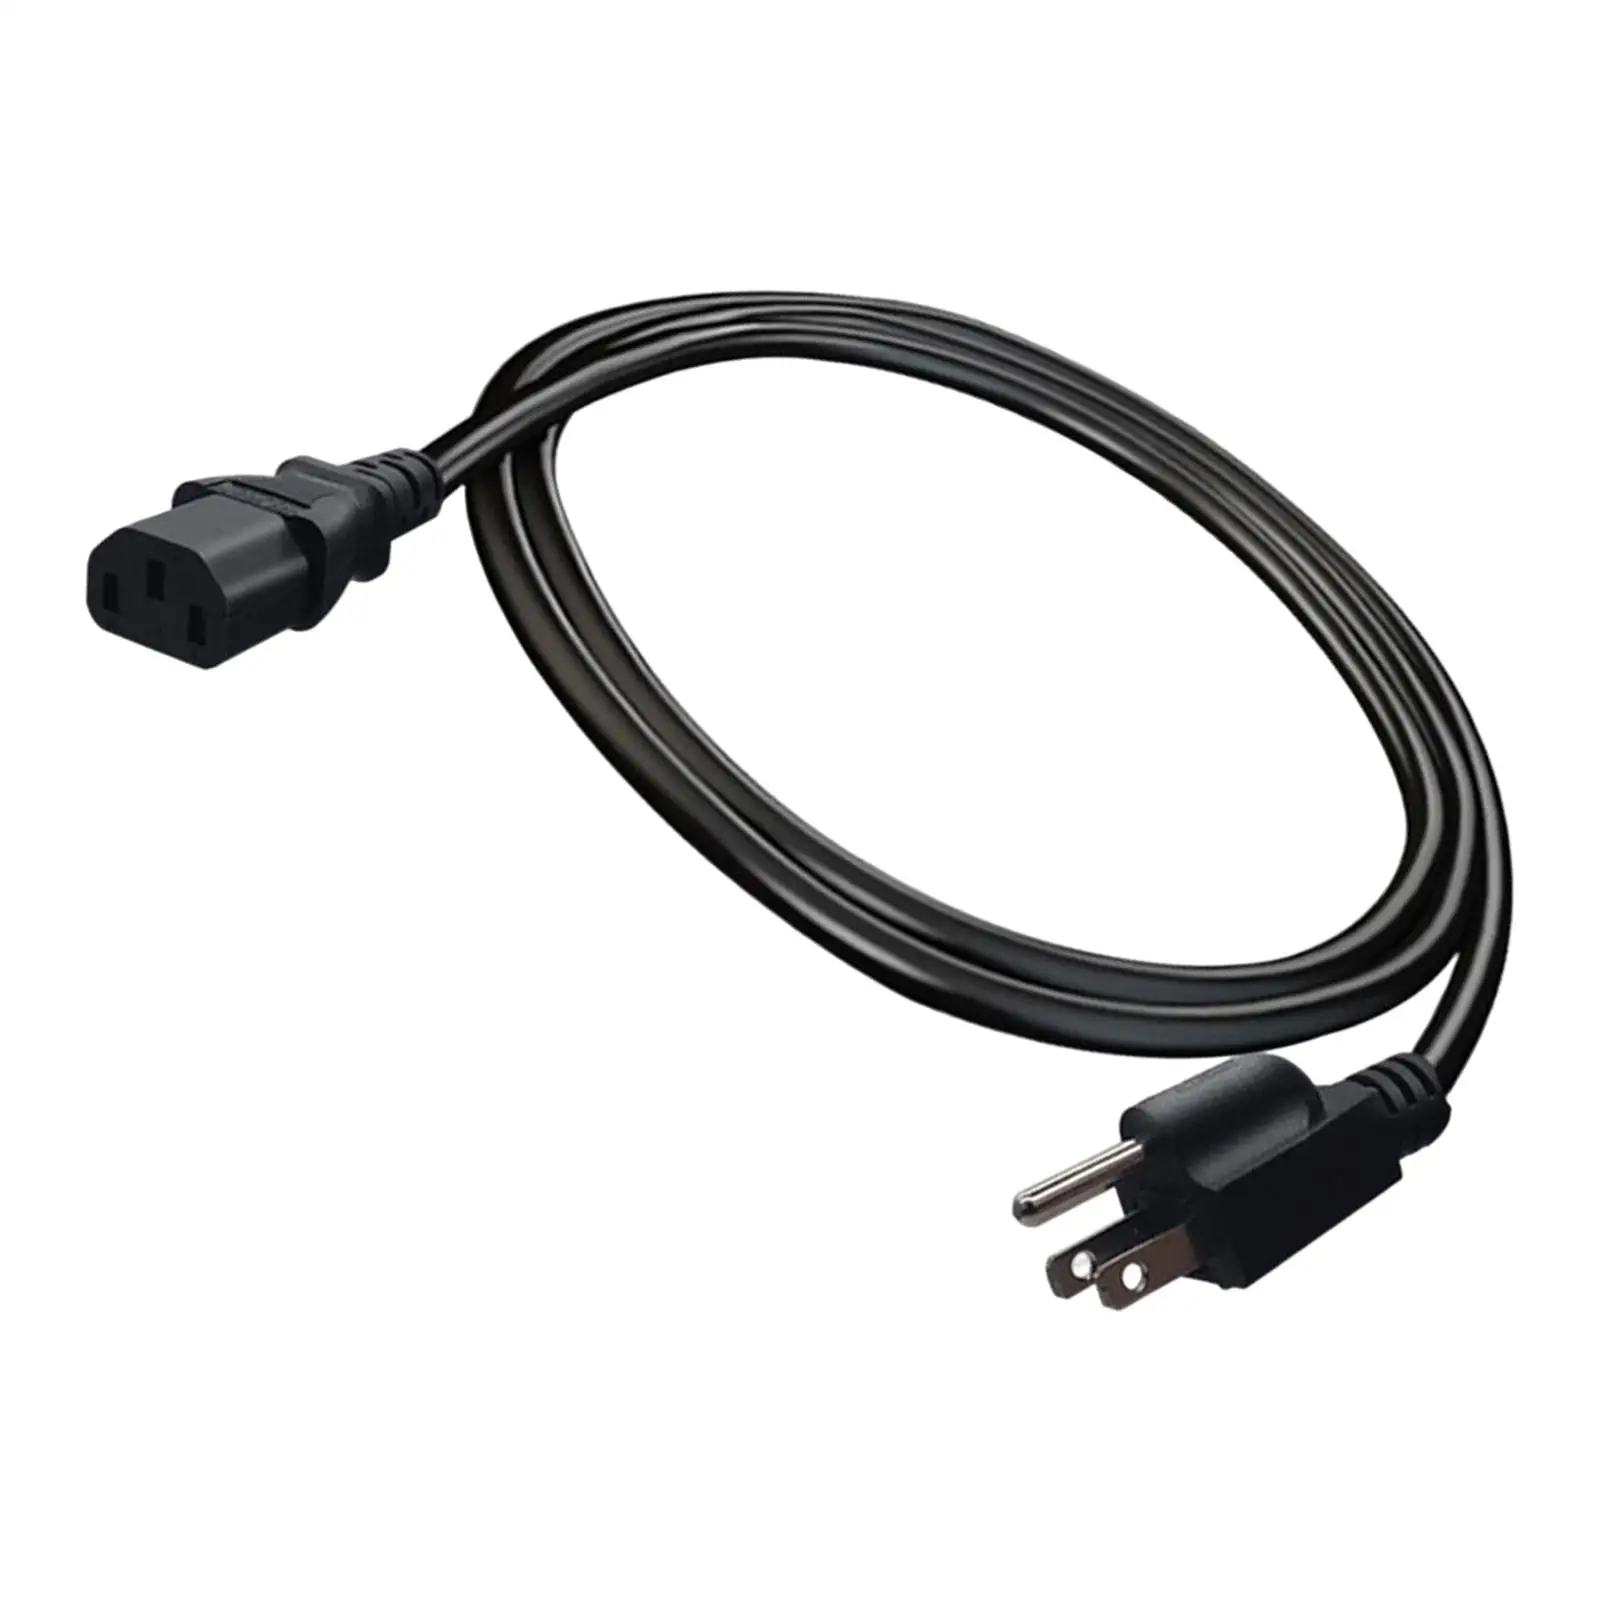 5-15P to IEC320 C13 Power Cord Connection Cable Multifunctional Universal 13A Adapter Cable for Computer Monitor